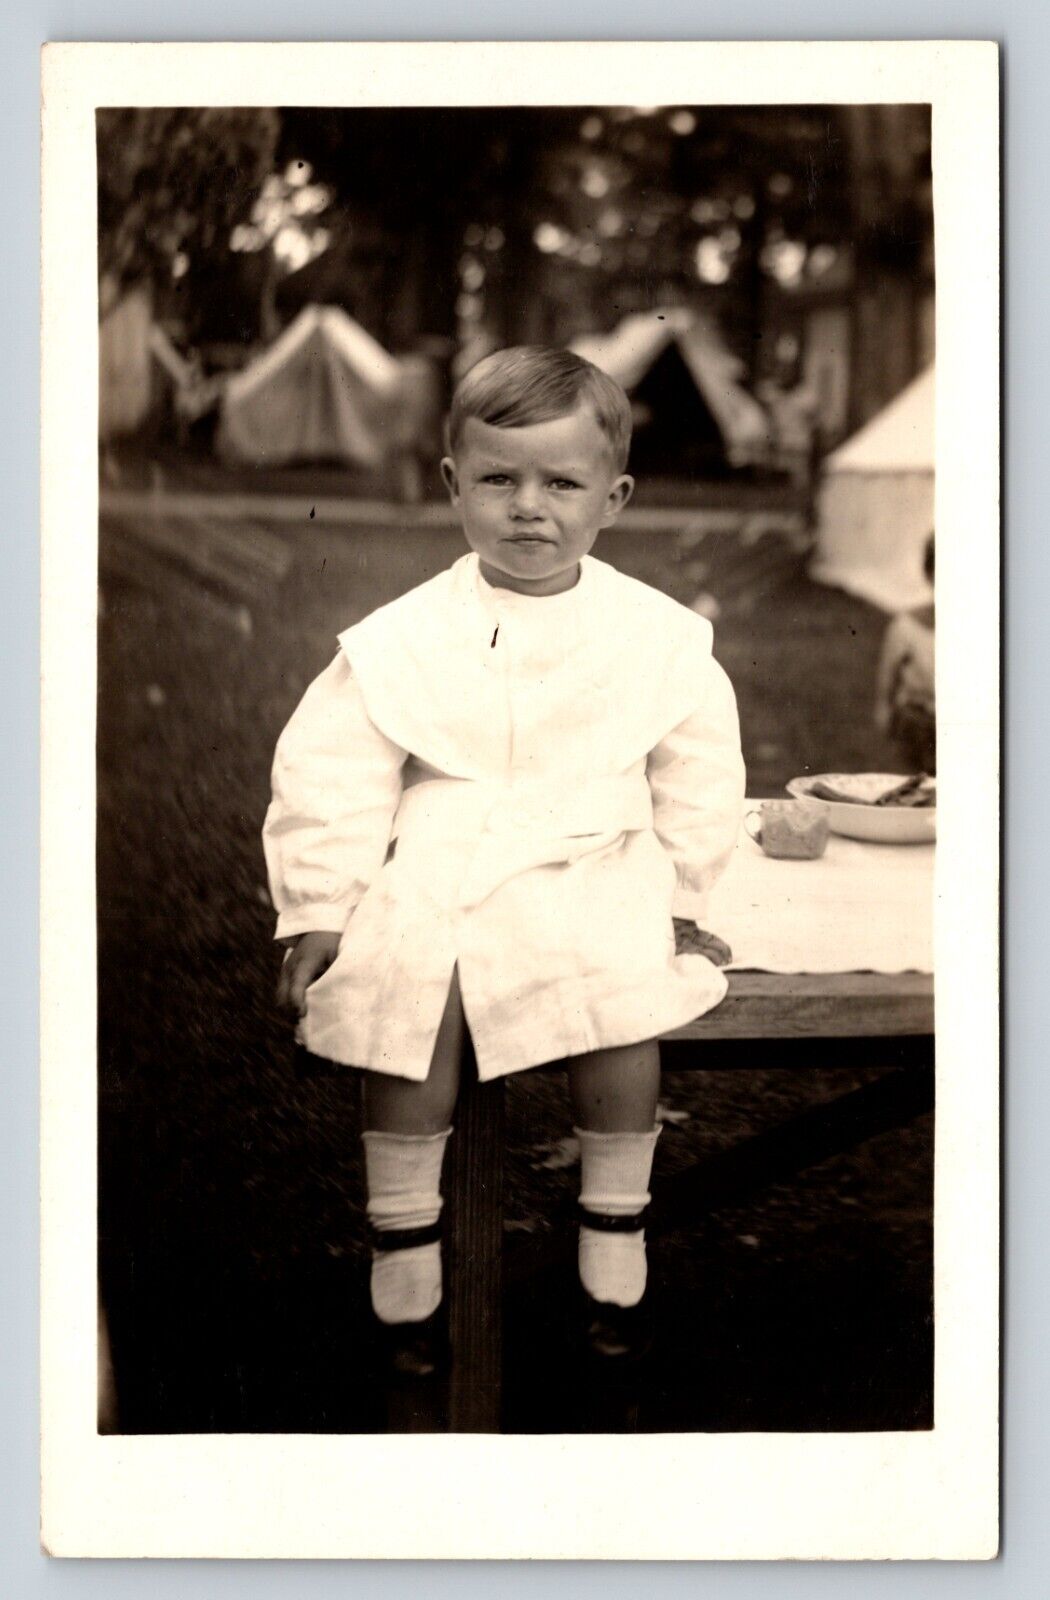 c1915 RPPC Postcard: Kid Sits On A Table, Tents In The Background - Summertime